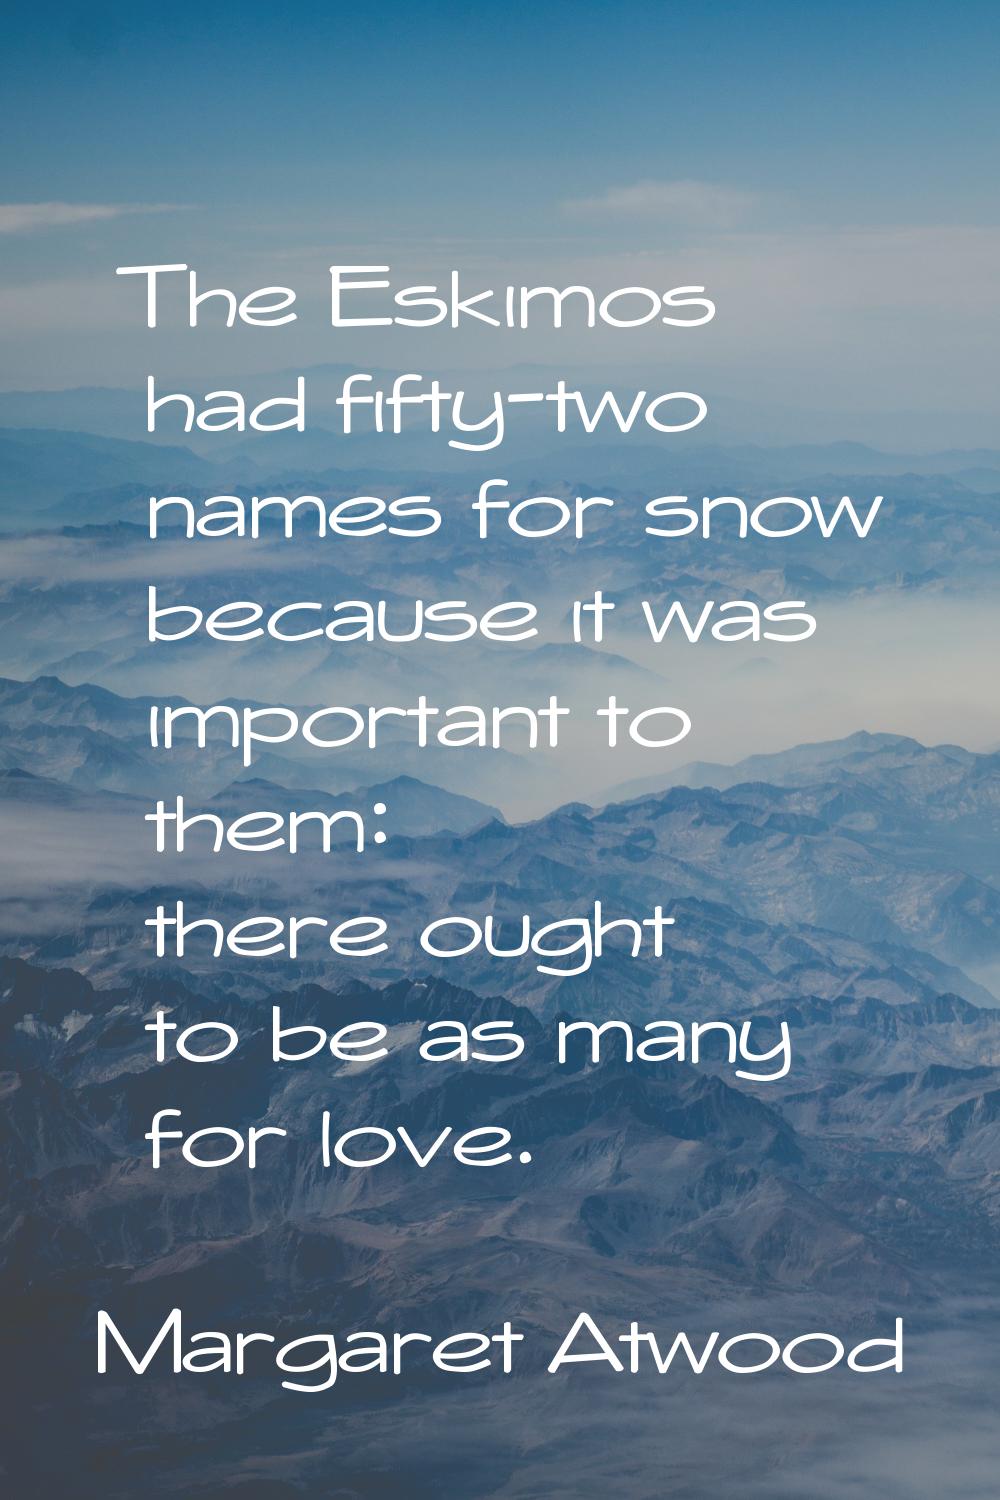 The Eskimos had fifty-two names for snow because it was important to them: there ought to be as man